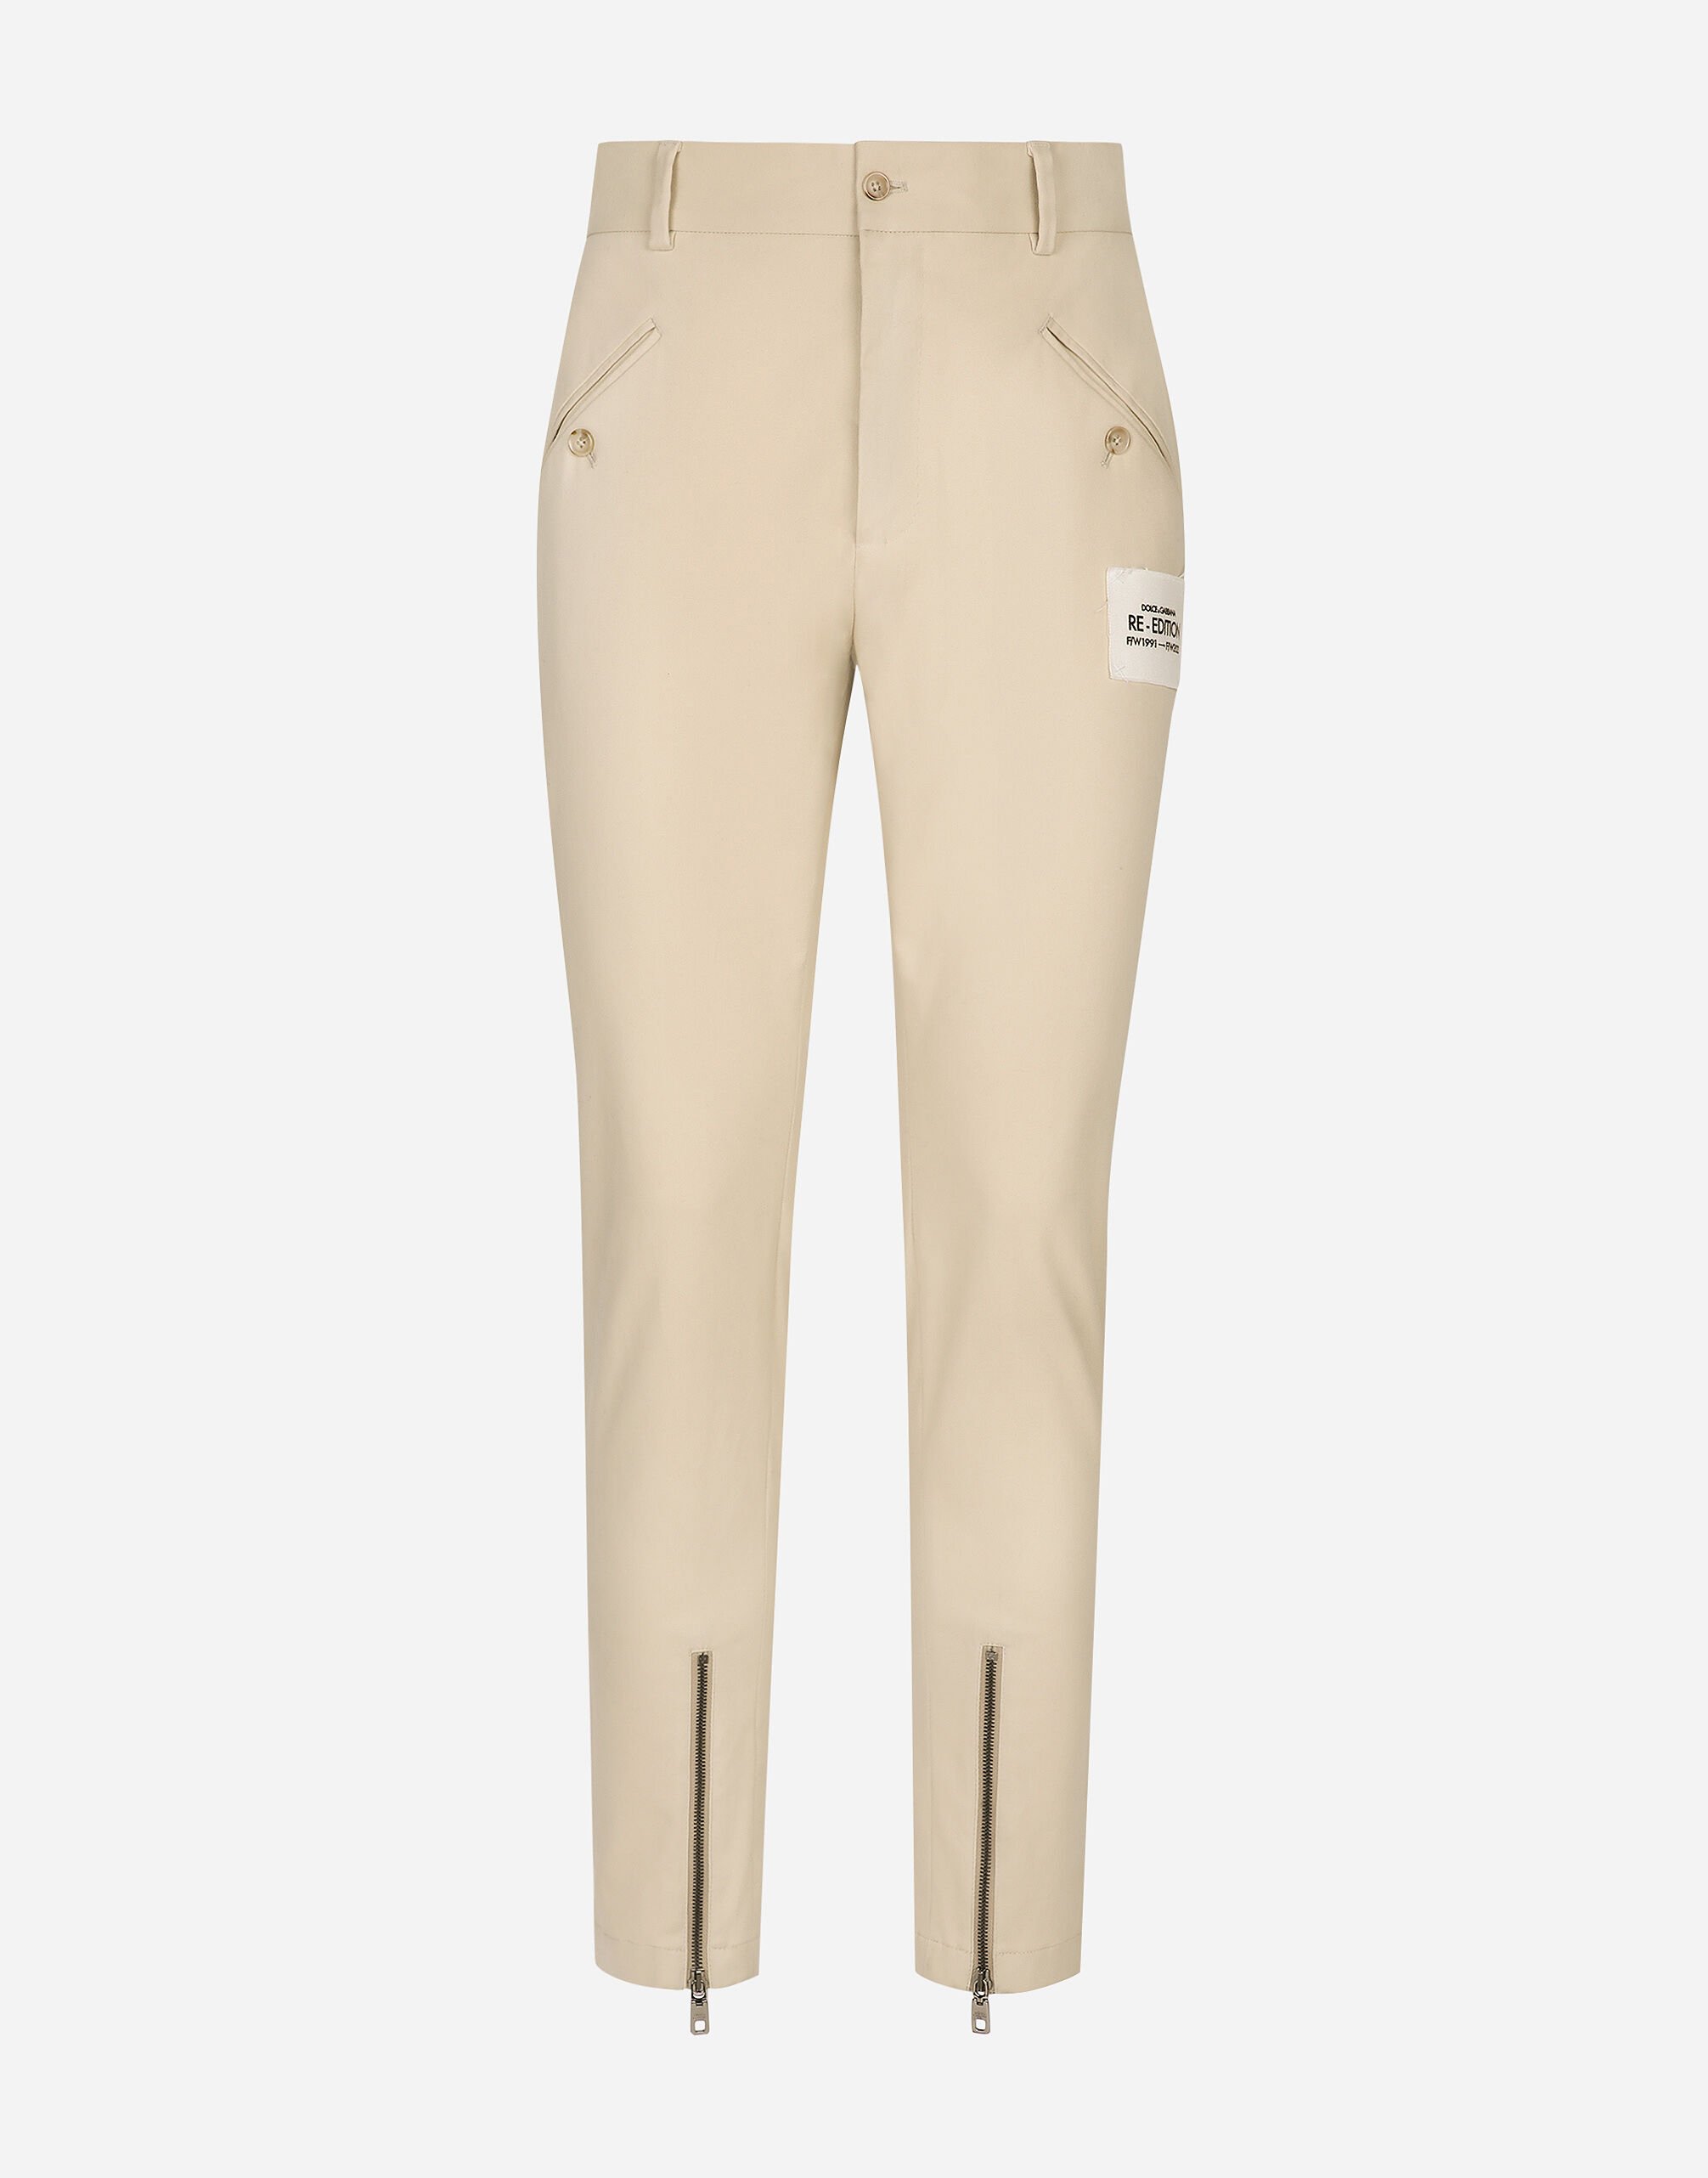 Dolce & Gabbana Stretch cotton pants with Re-Edition label Beige GY6GMTGH145